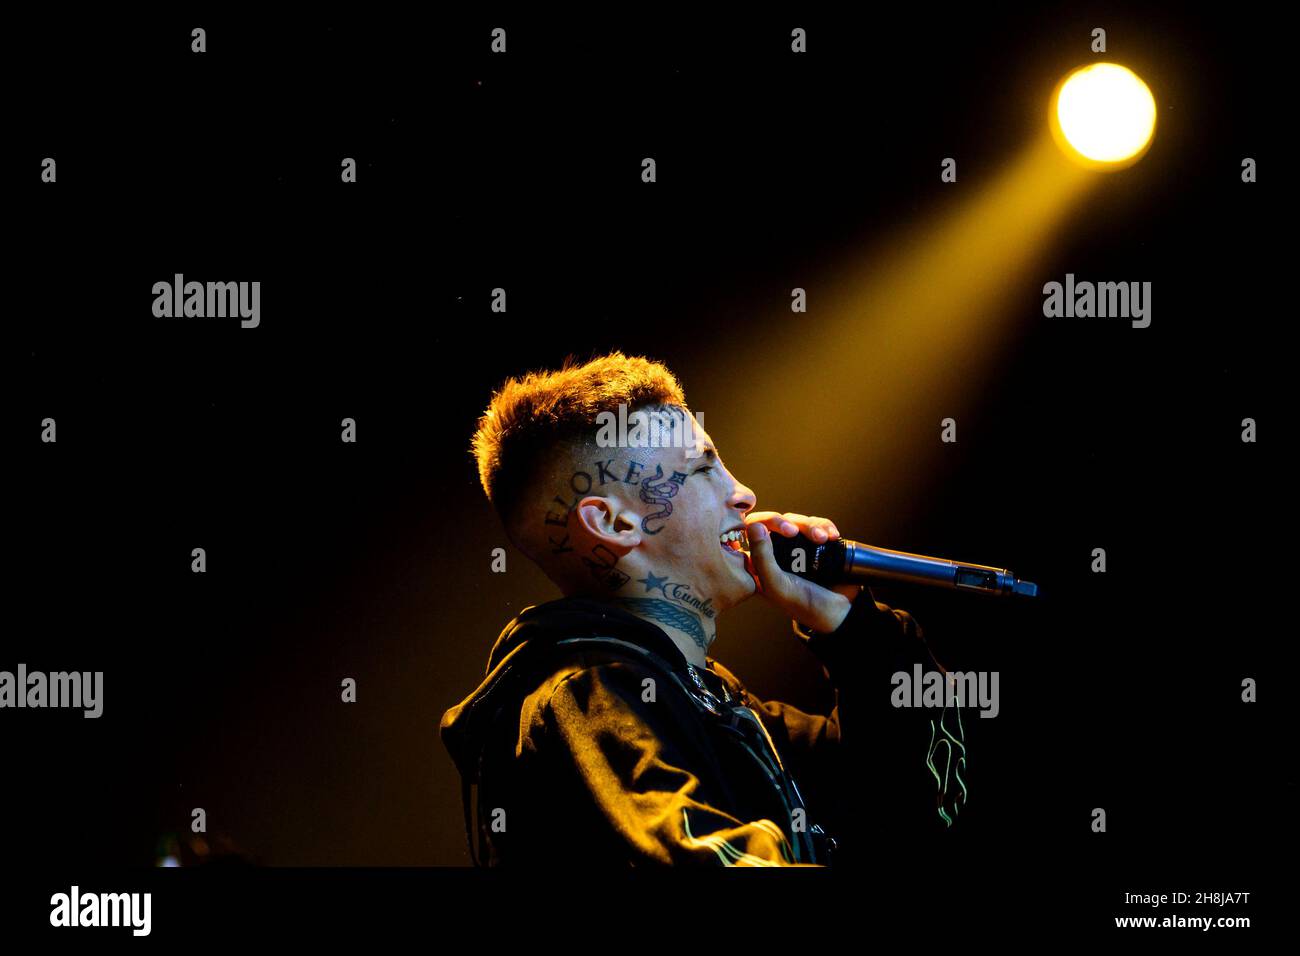 Buenos Aires, Argentina. 29th Nov, 2021. Elian Ángel Valenzuela, commonly known as L-Gante, performs on stage during a music concert at the Luna Park Stadium in Buenos Aires. (Photo by Manuel Cortina/SOPA Images/Sipa USA) Credit: Sipa USA/Alamy Live News Stock Photo